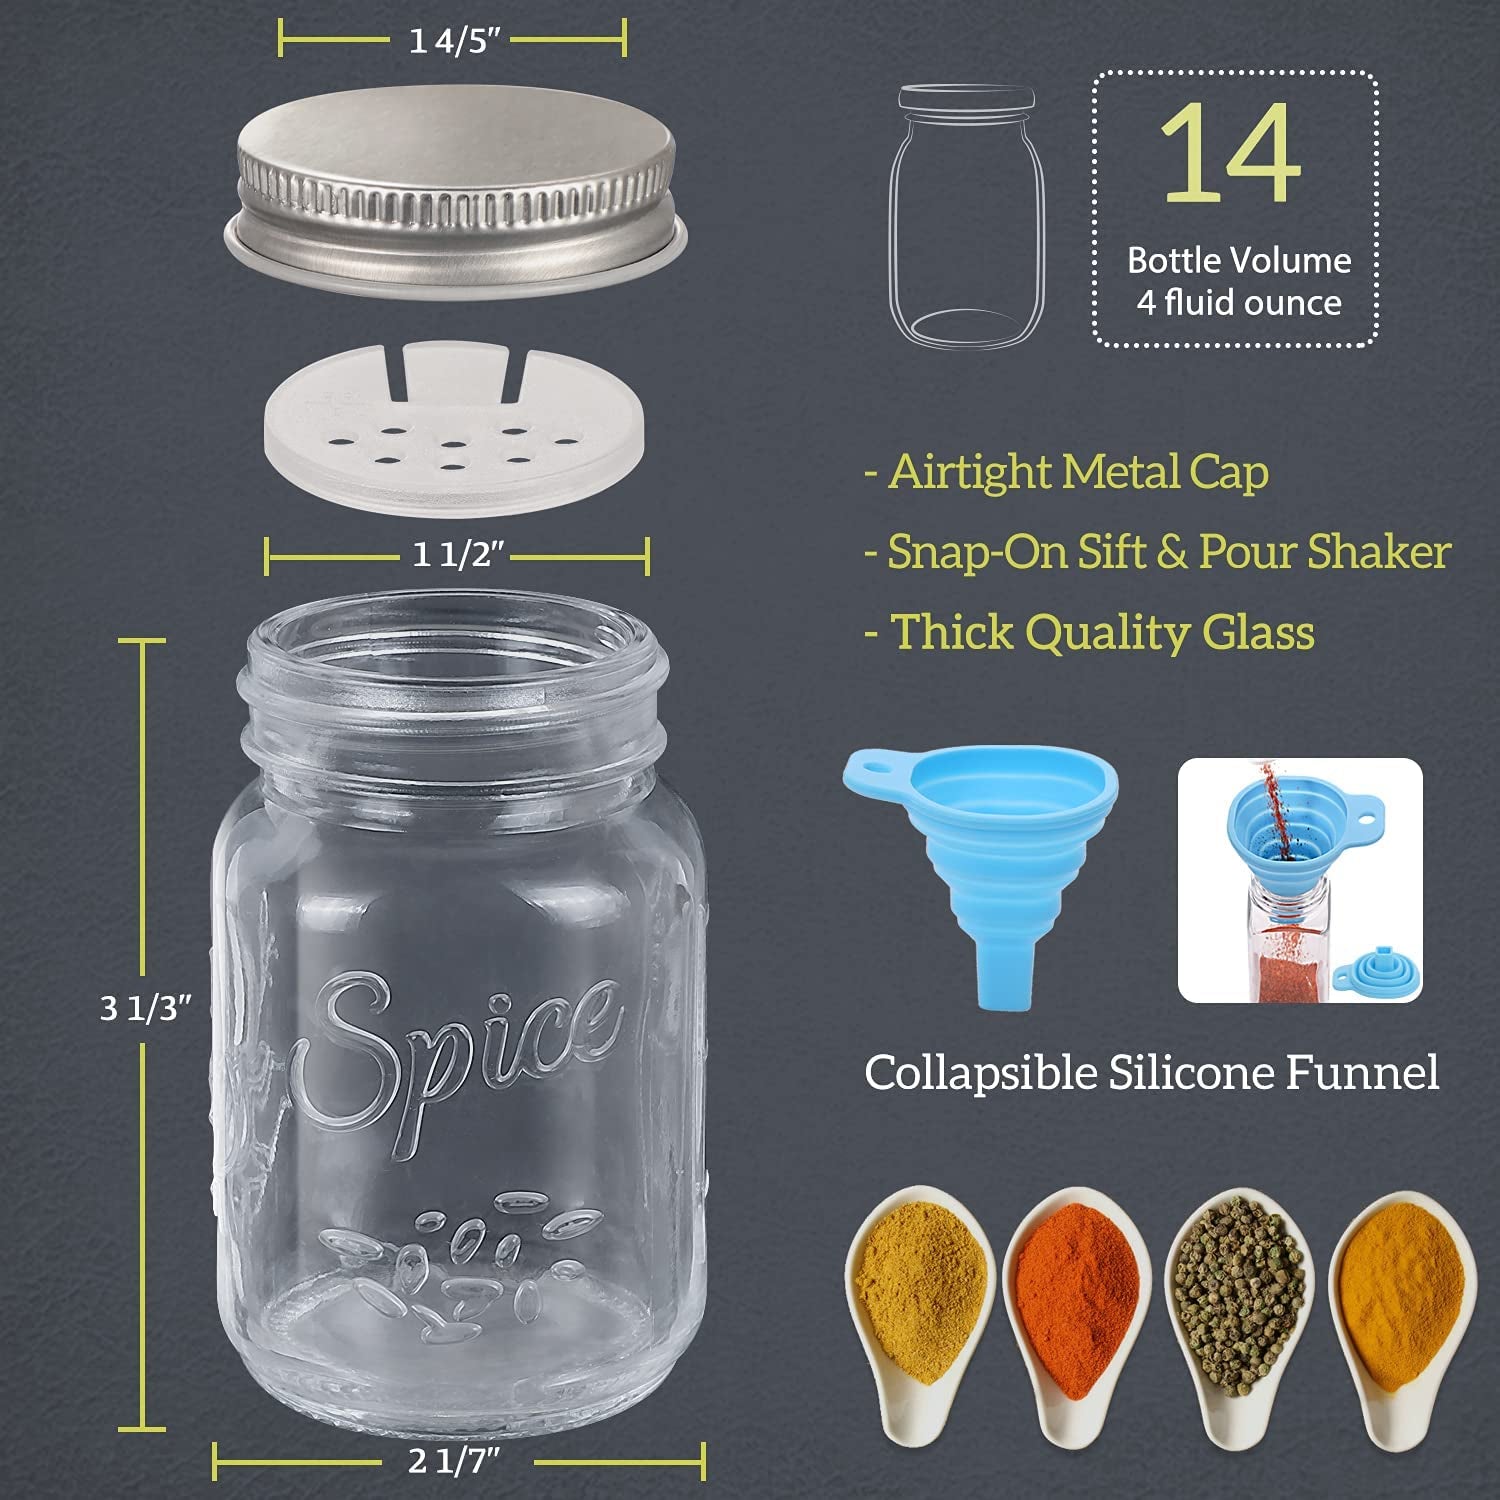 14 Pcs Glass Mason Spice Jars with Spice Labels - 4Oz Empty Spice Bottles - Shaker Lids and Airtight Metal Caps - Chalk Marker and Collapsible Funnel Included- for Herbs & Spices, Jelly, DIY & Crafts